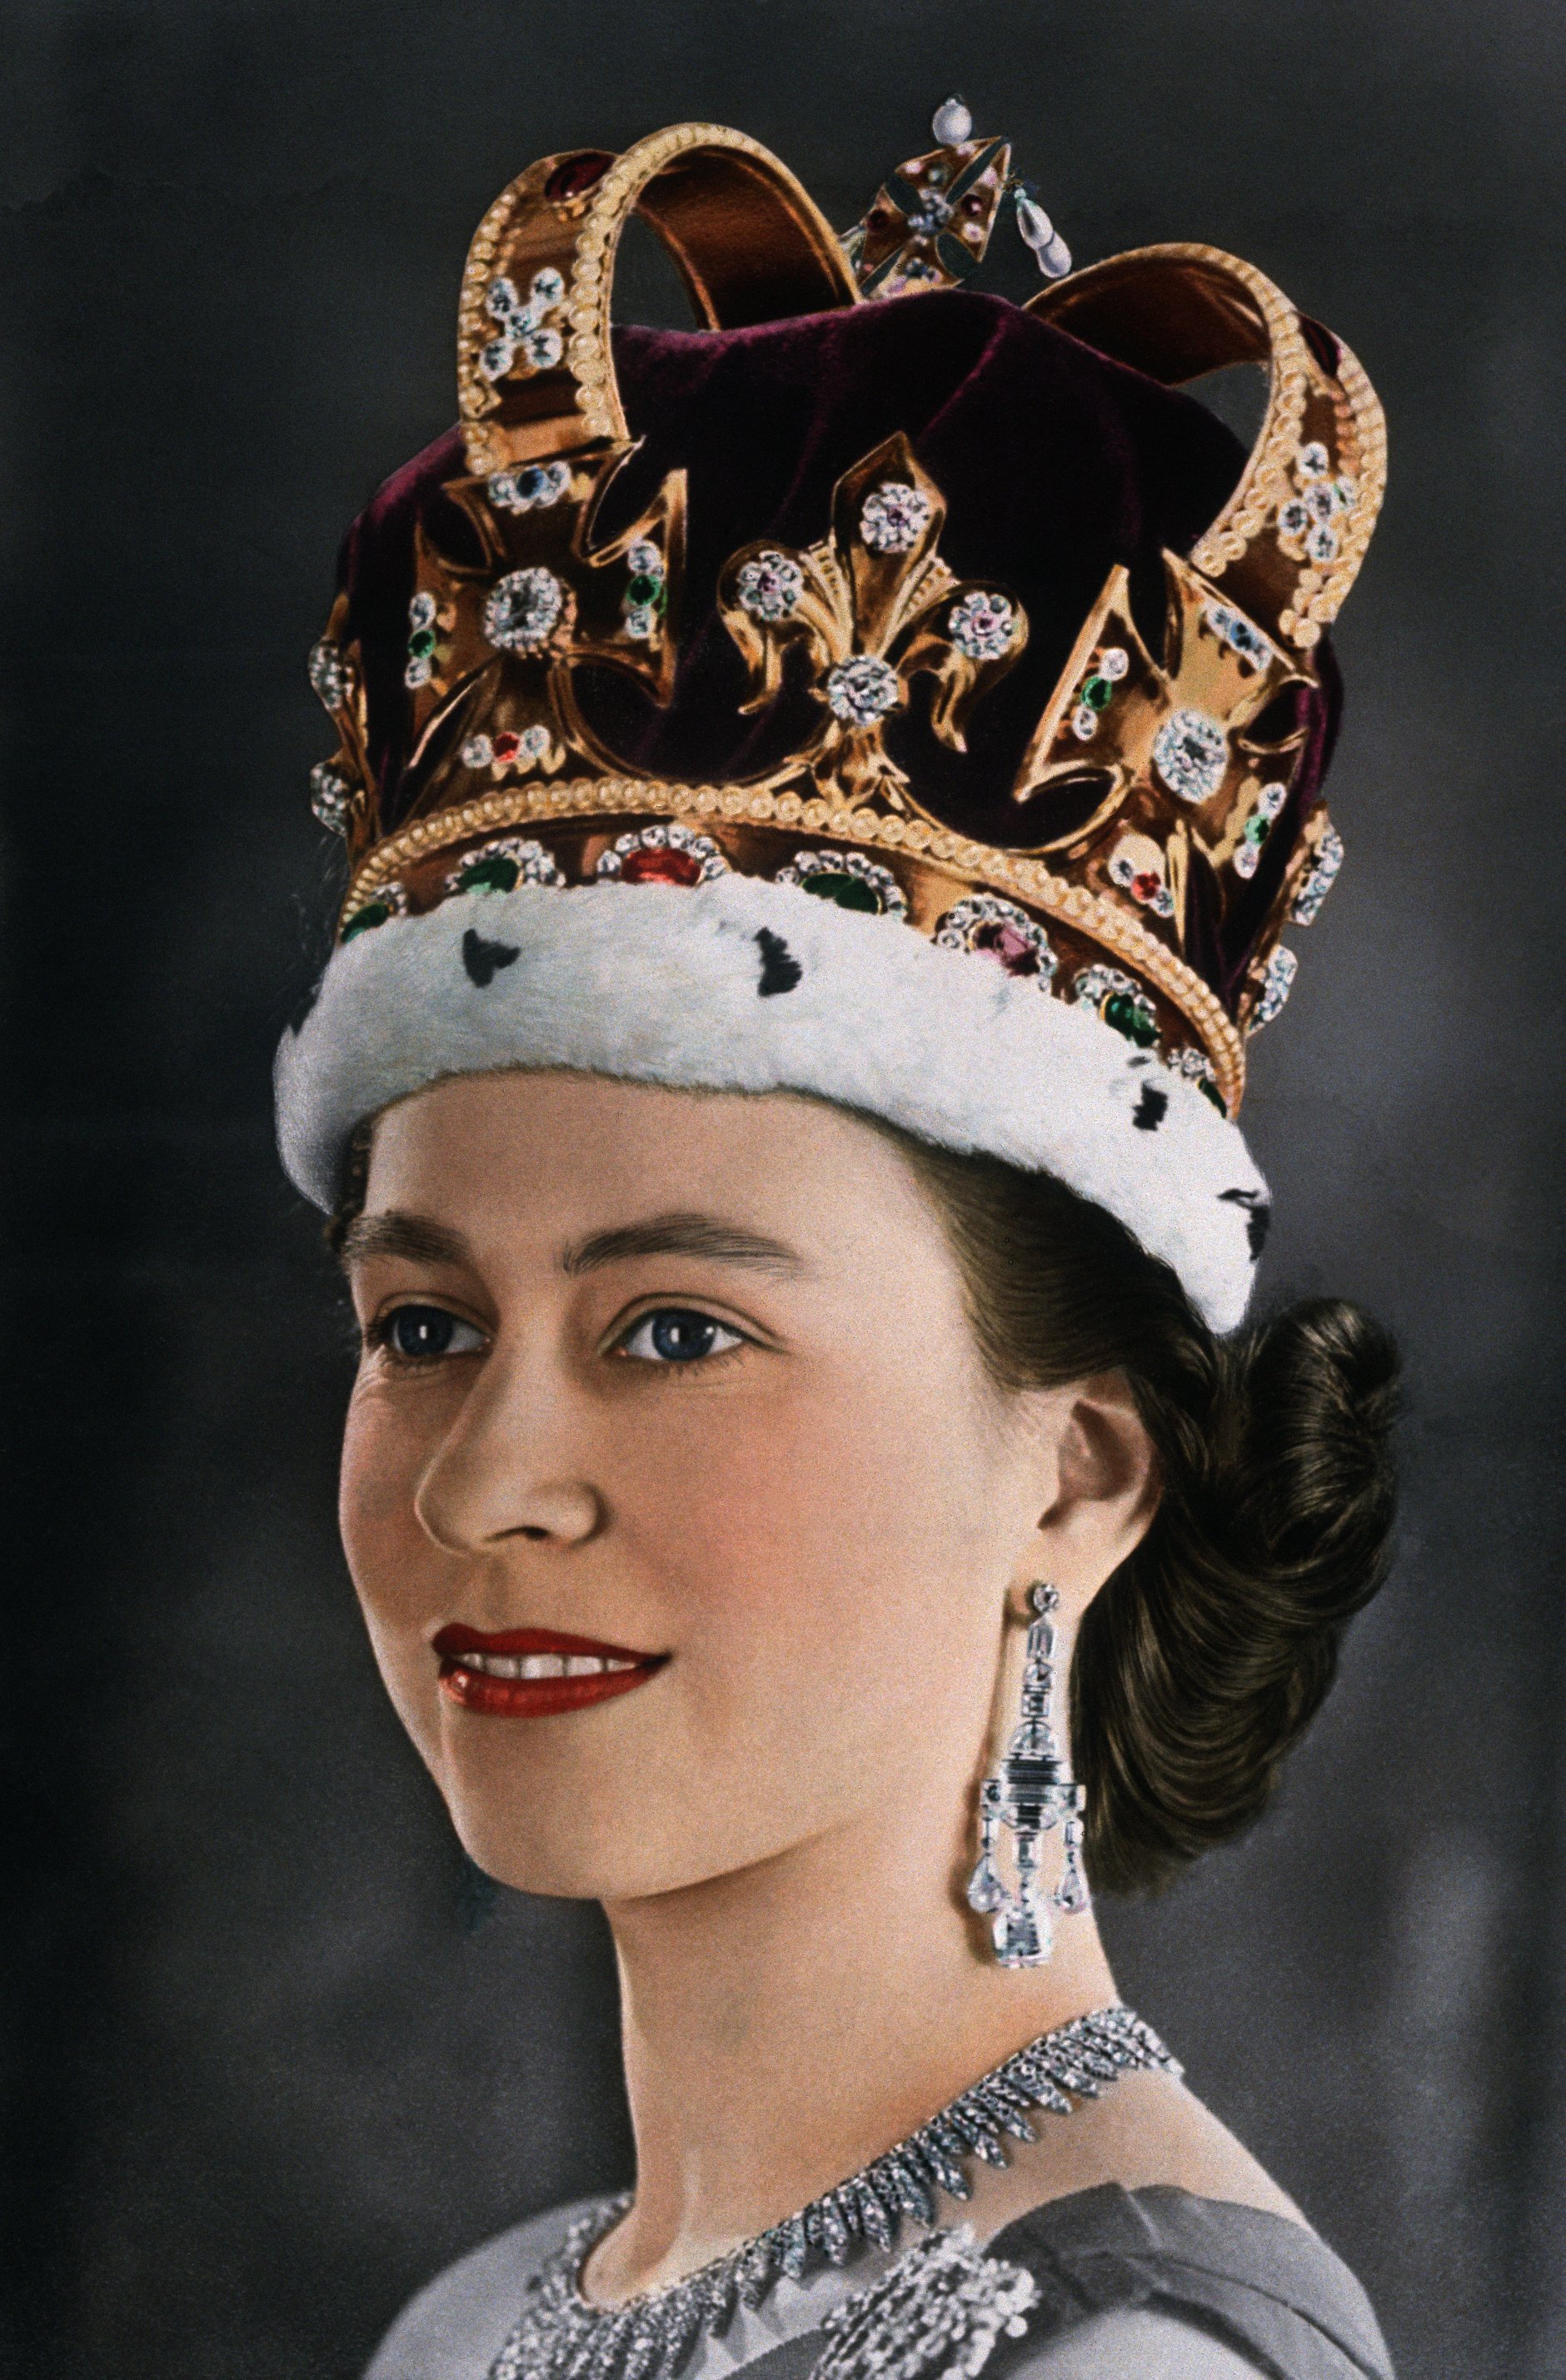 A portrait of young Elizabeth II (1926-2022 ) of Great Britain and Northern Ireland, wearing the crown of the kings and queens of England for her coronation in June of 1953 | Source: Getty Images